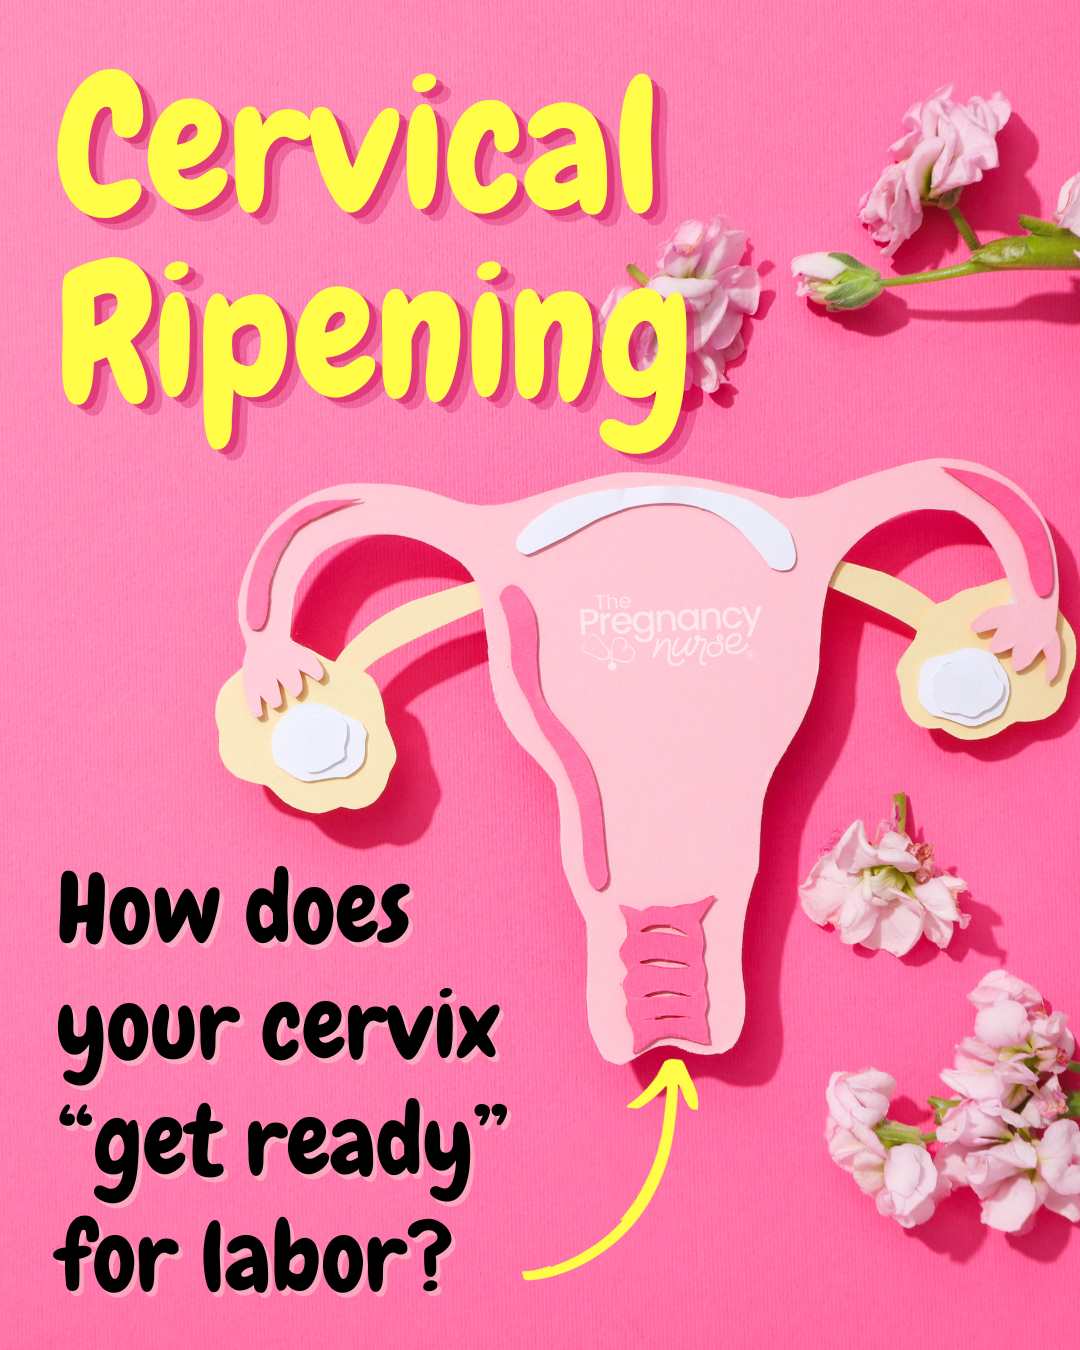 uterus made out of paper with dried flowers around it. Cervical ripening/ how does your cervix "get ready" for labor?